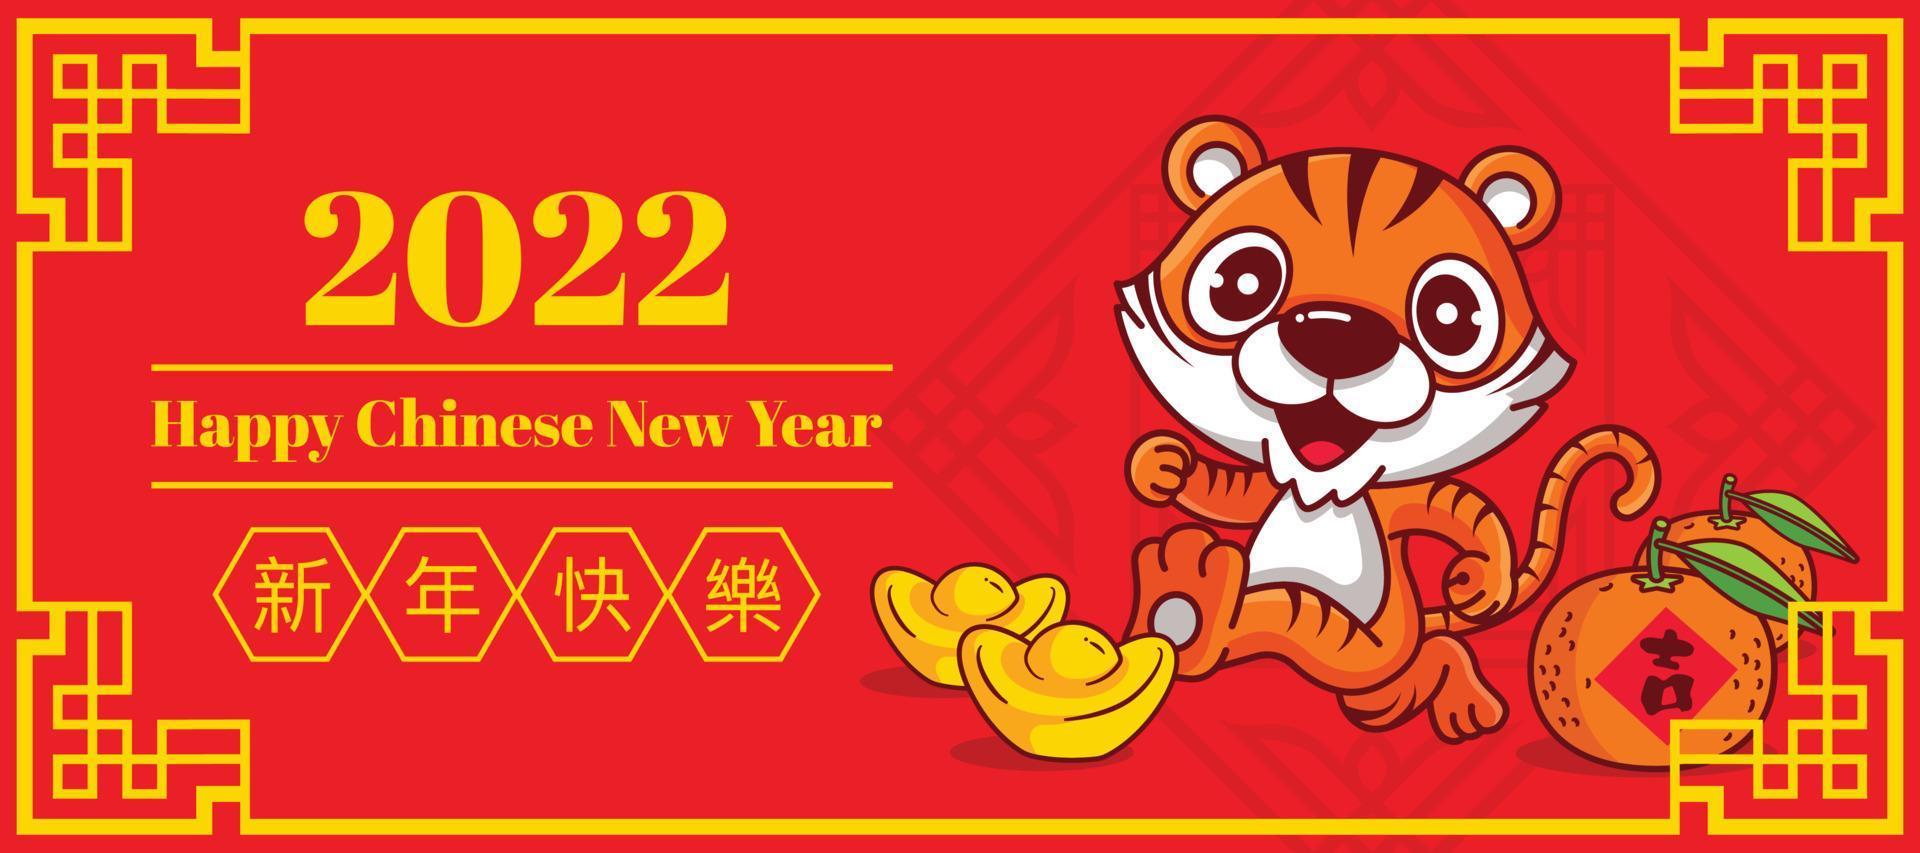 2022 Happy Chinese New Year greeting card. Cartoon cute tiger running happily. Gold ingot and mandarin orange on floor with 2022 chinese new year wishes vector